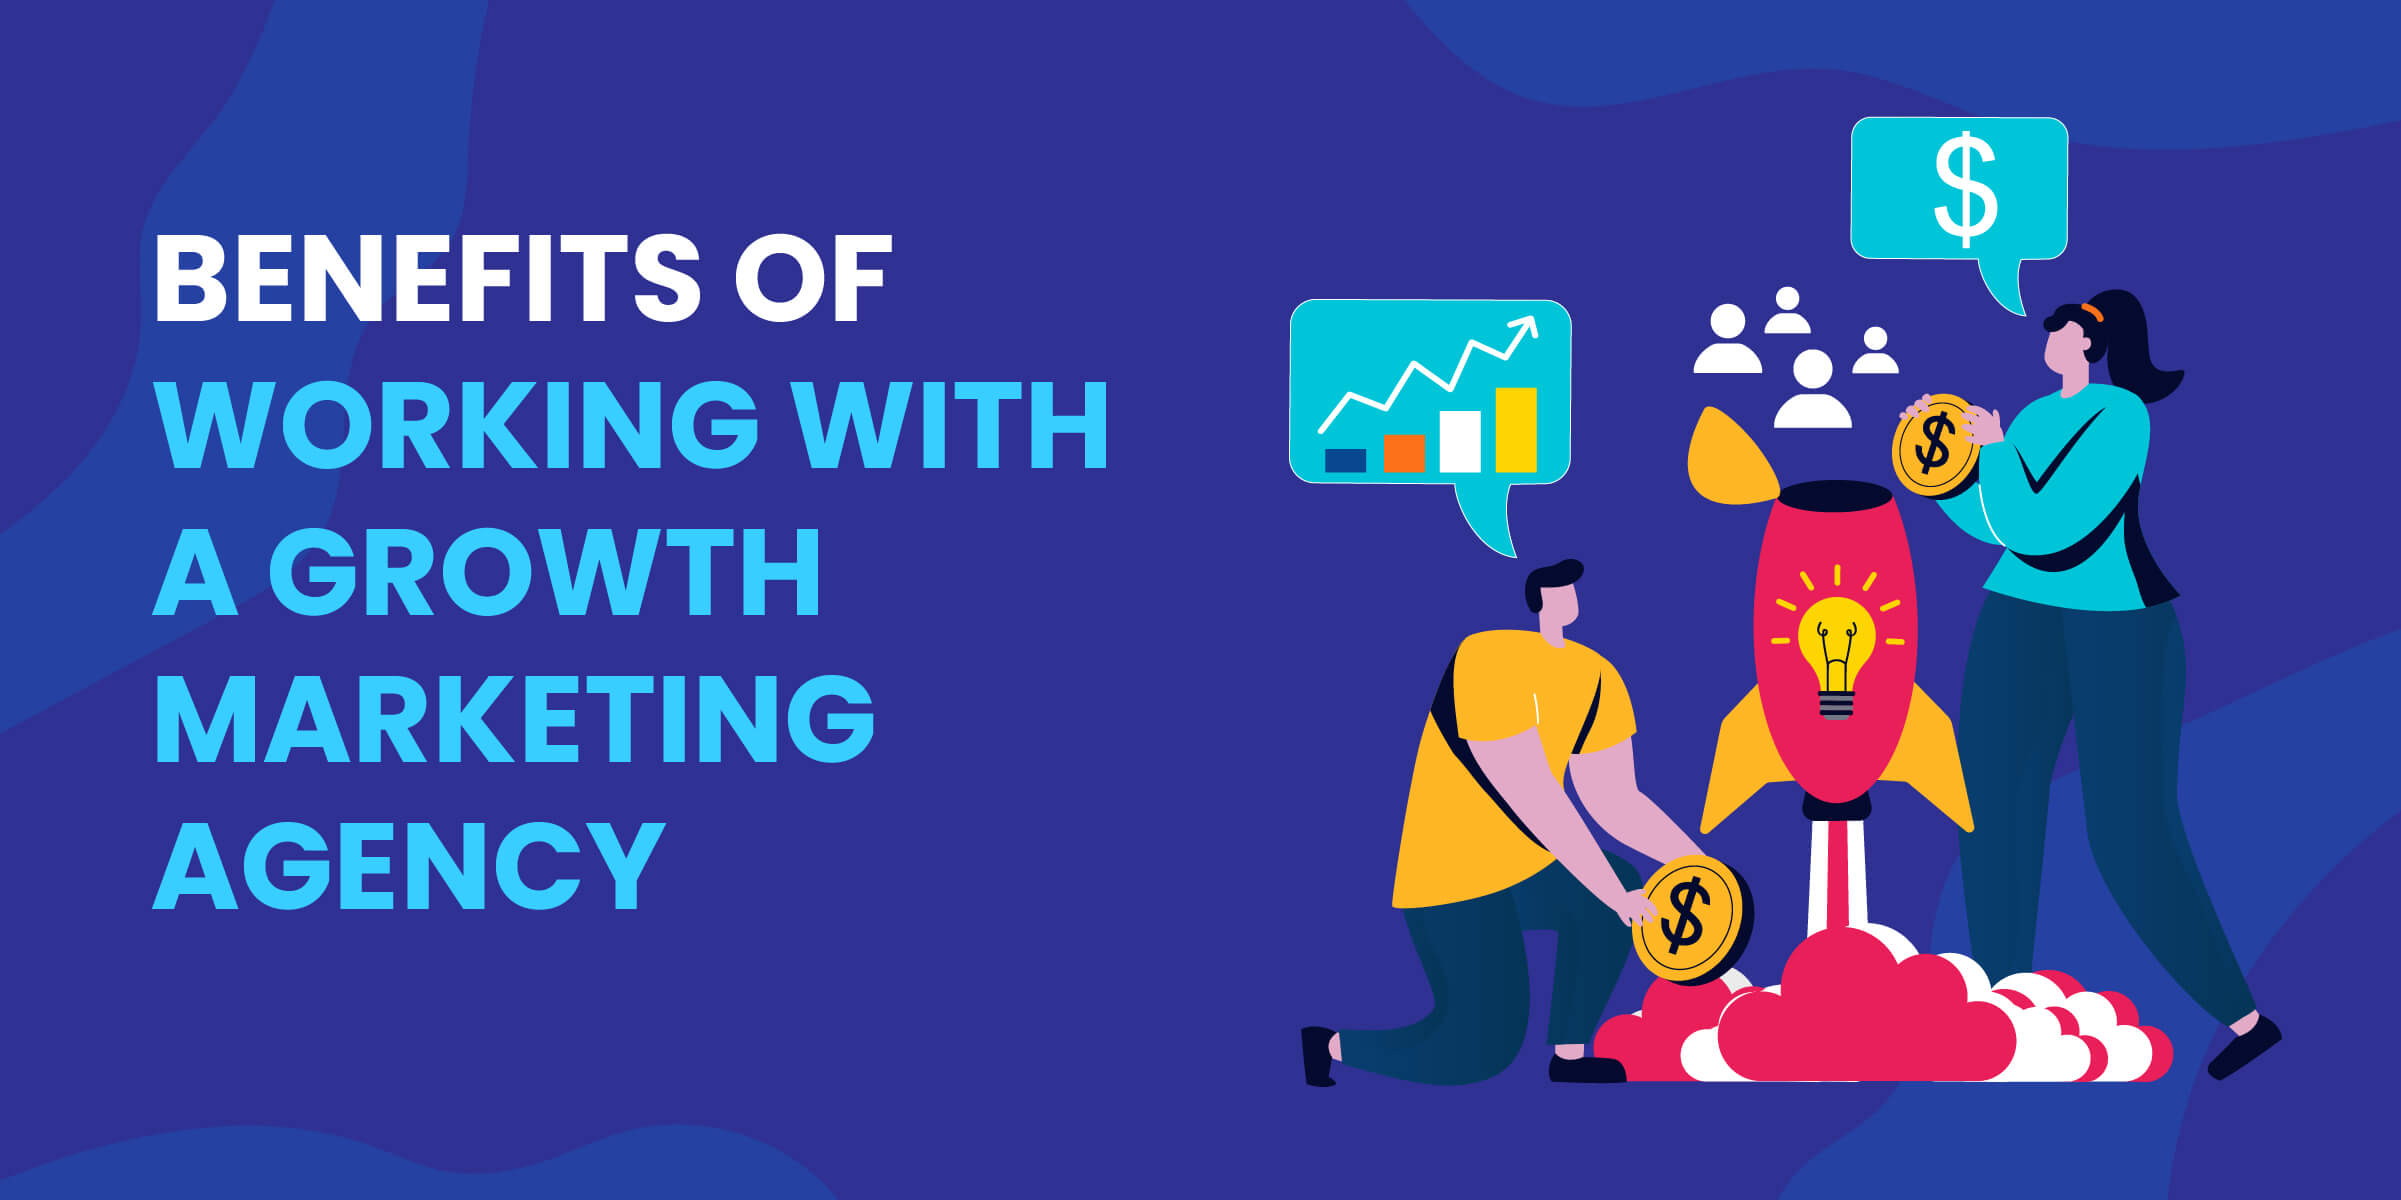 Benefits of Working with Growth Marketing Agency